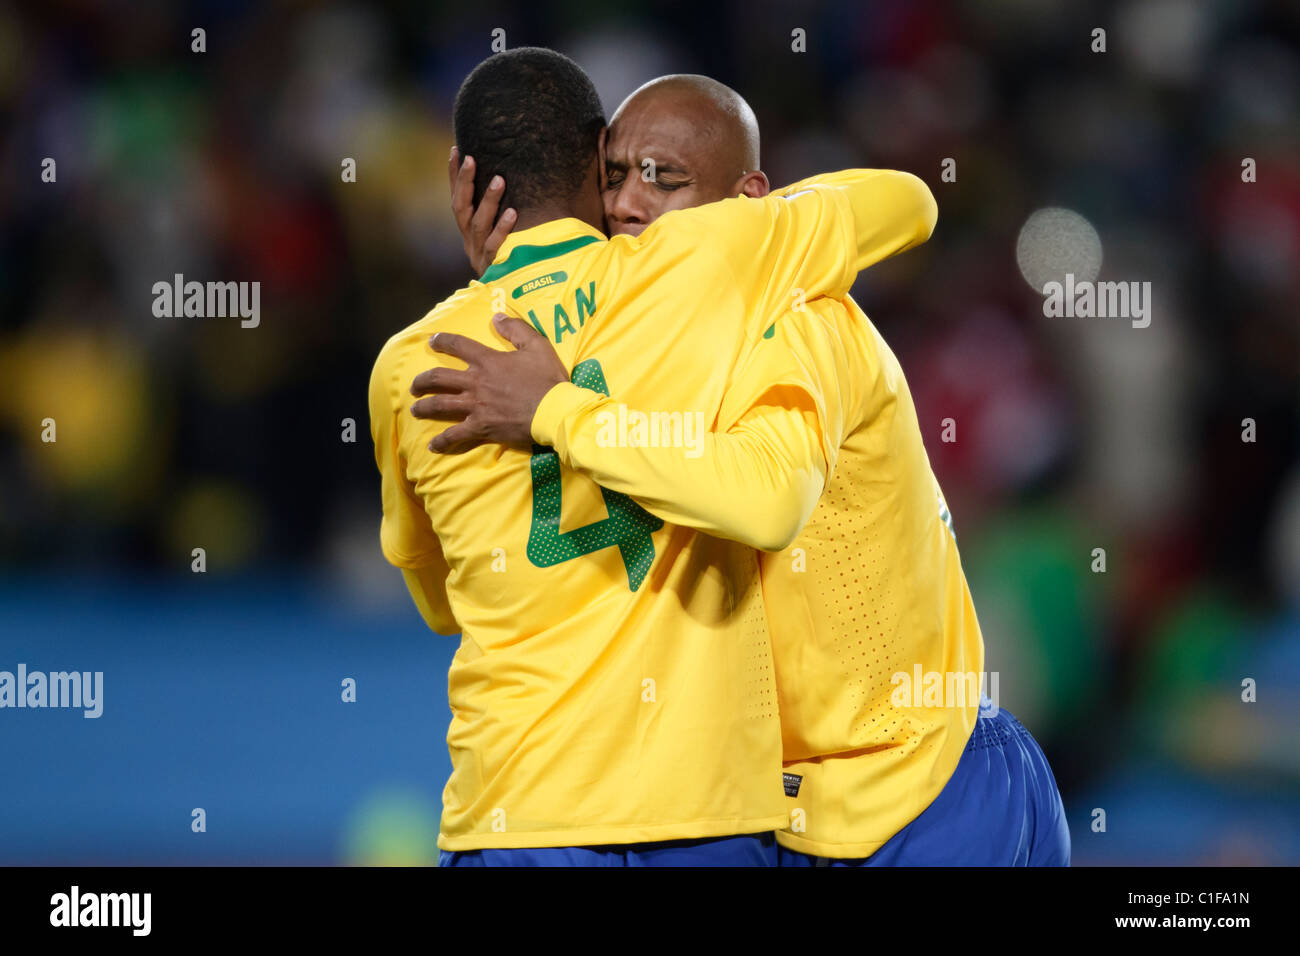 Juan (l) and Maicon (r) of Brazil embrace after Maicon scored a goal against North Korea during a 2010 World Cup football match. Stock Photo